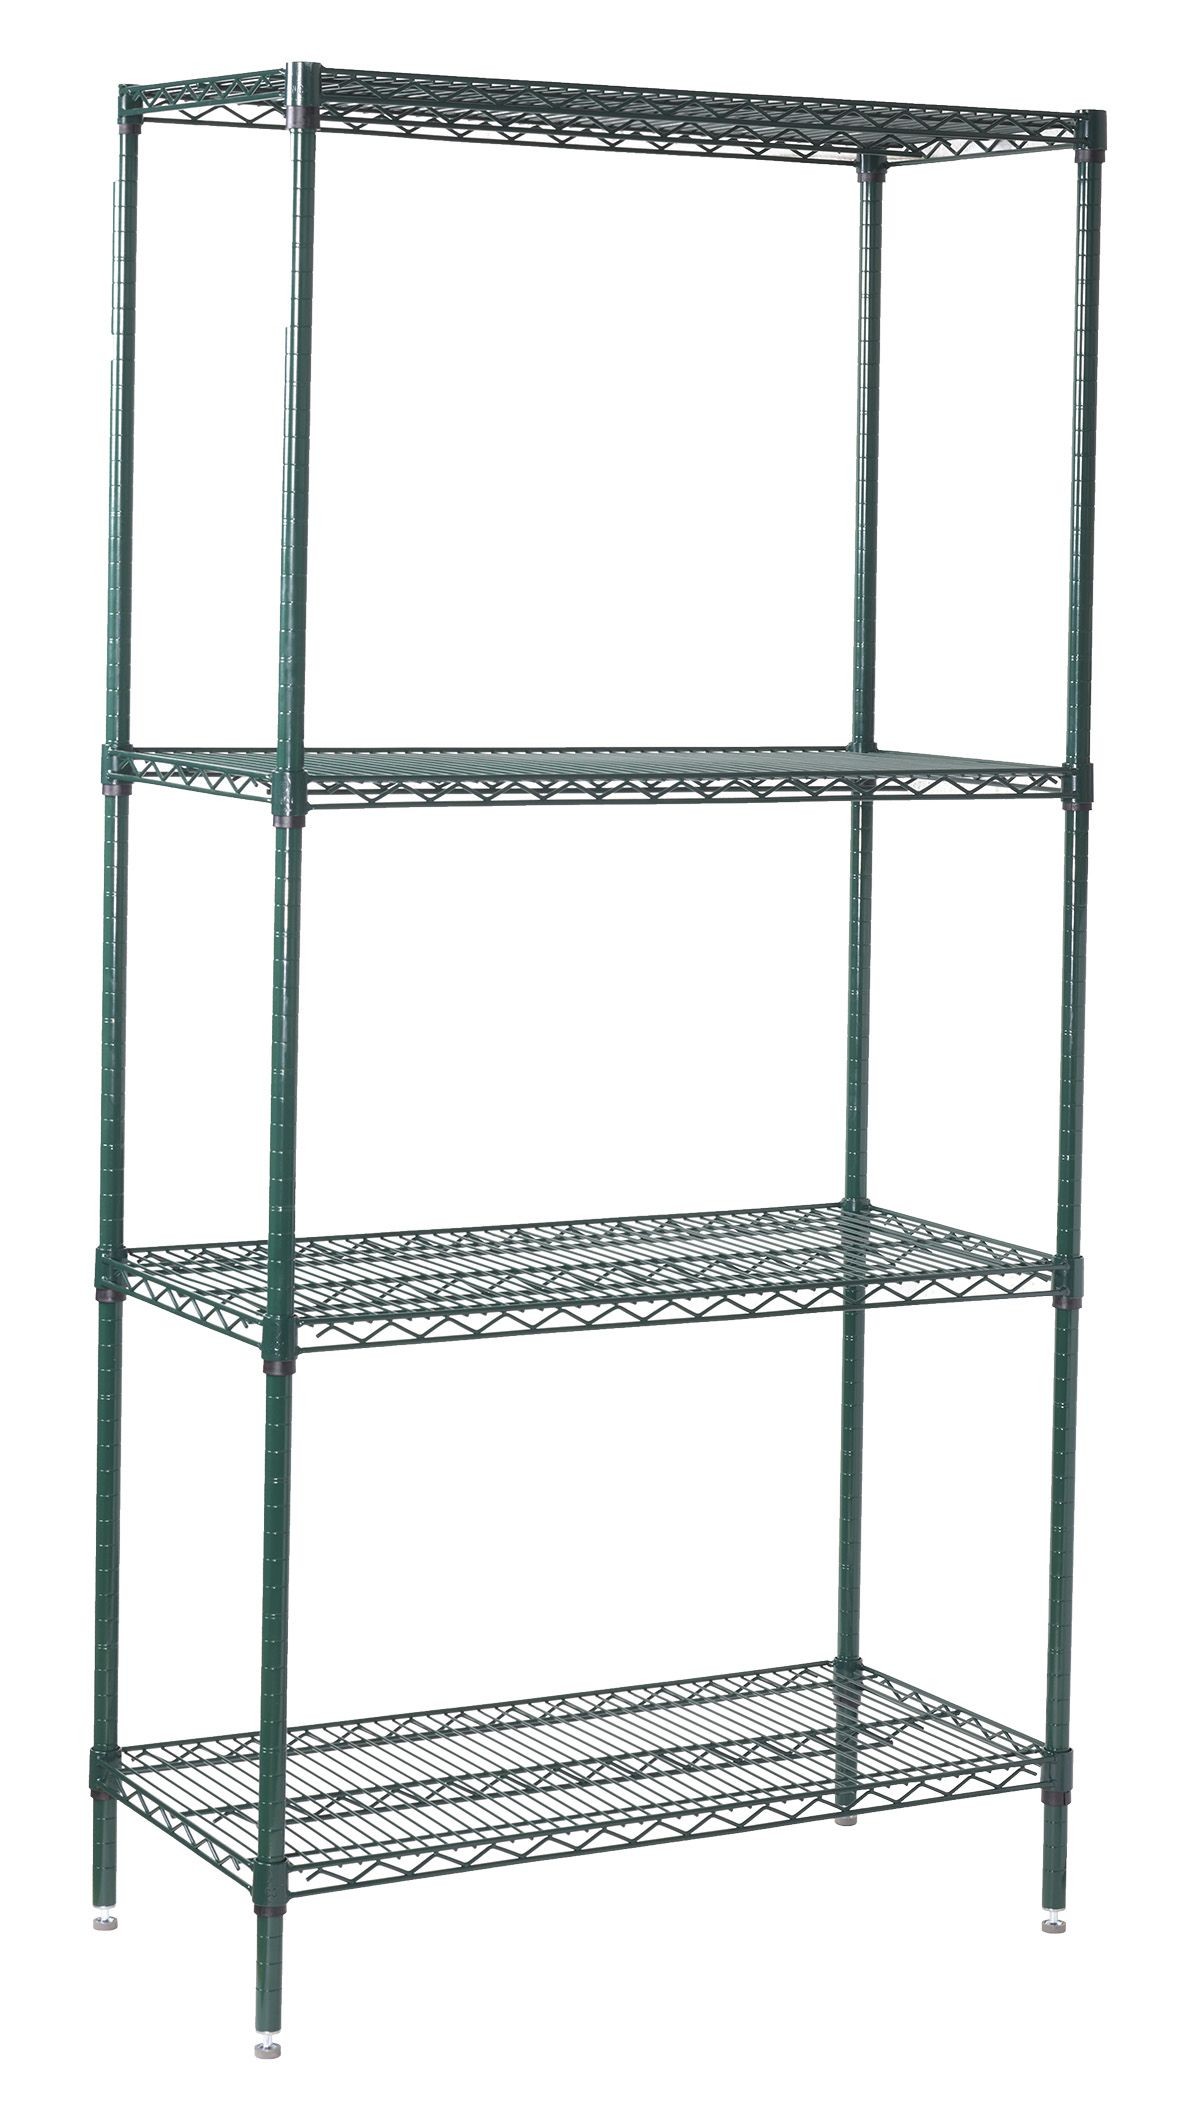 Winco VEXS-2448 Epoxy Coated 4-Tier Wire Shelving Set, 24" x 48" x 72"